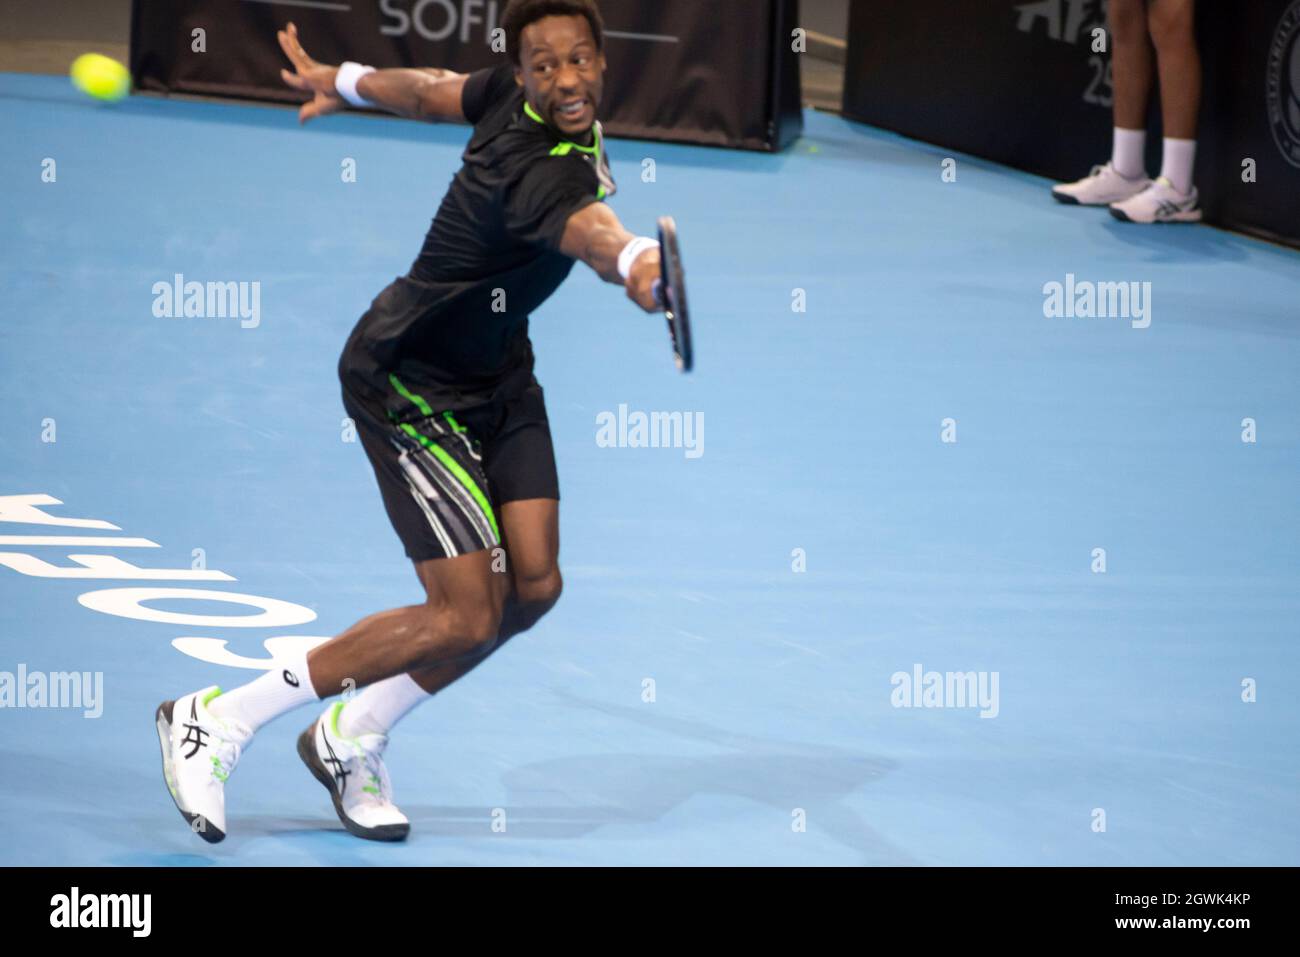 The French tennis player Gael Monfils in action against Jannik Sinner of Italy during the final of the Sofia Open 2021 ATP 250 indoor tennis tournament on hard courts, Alamy Live News Stock Photo